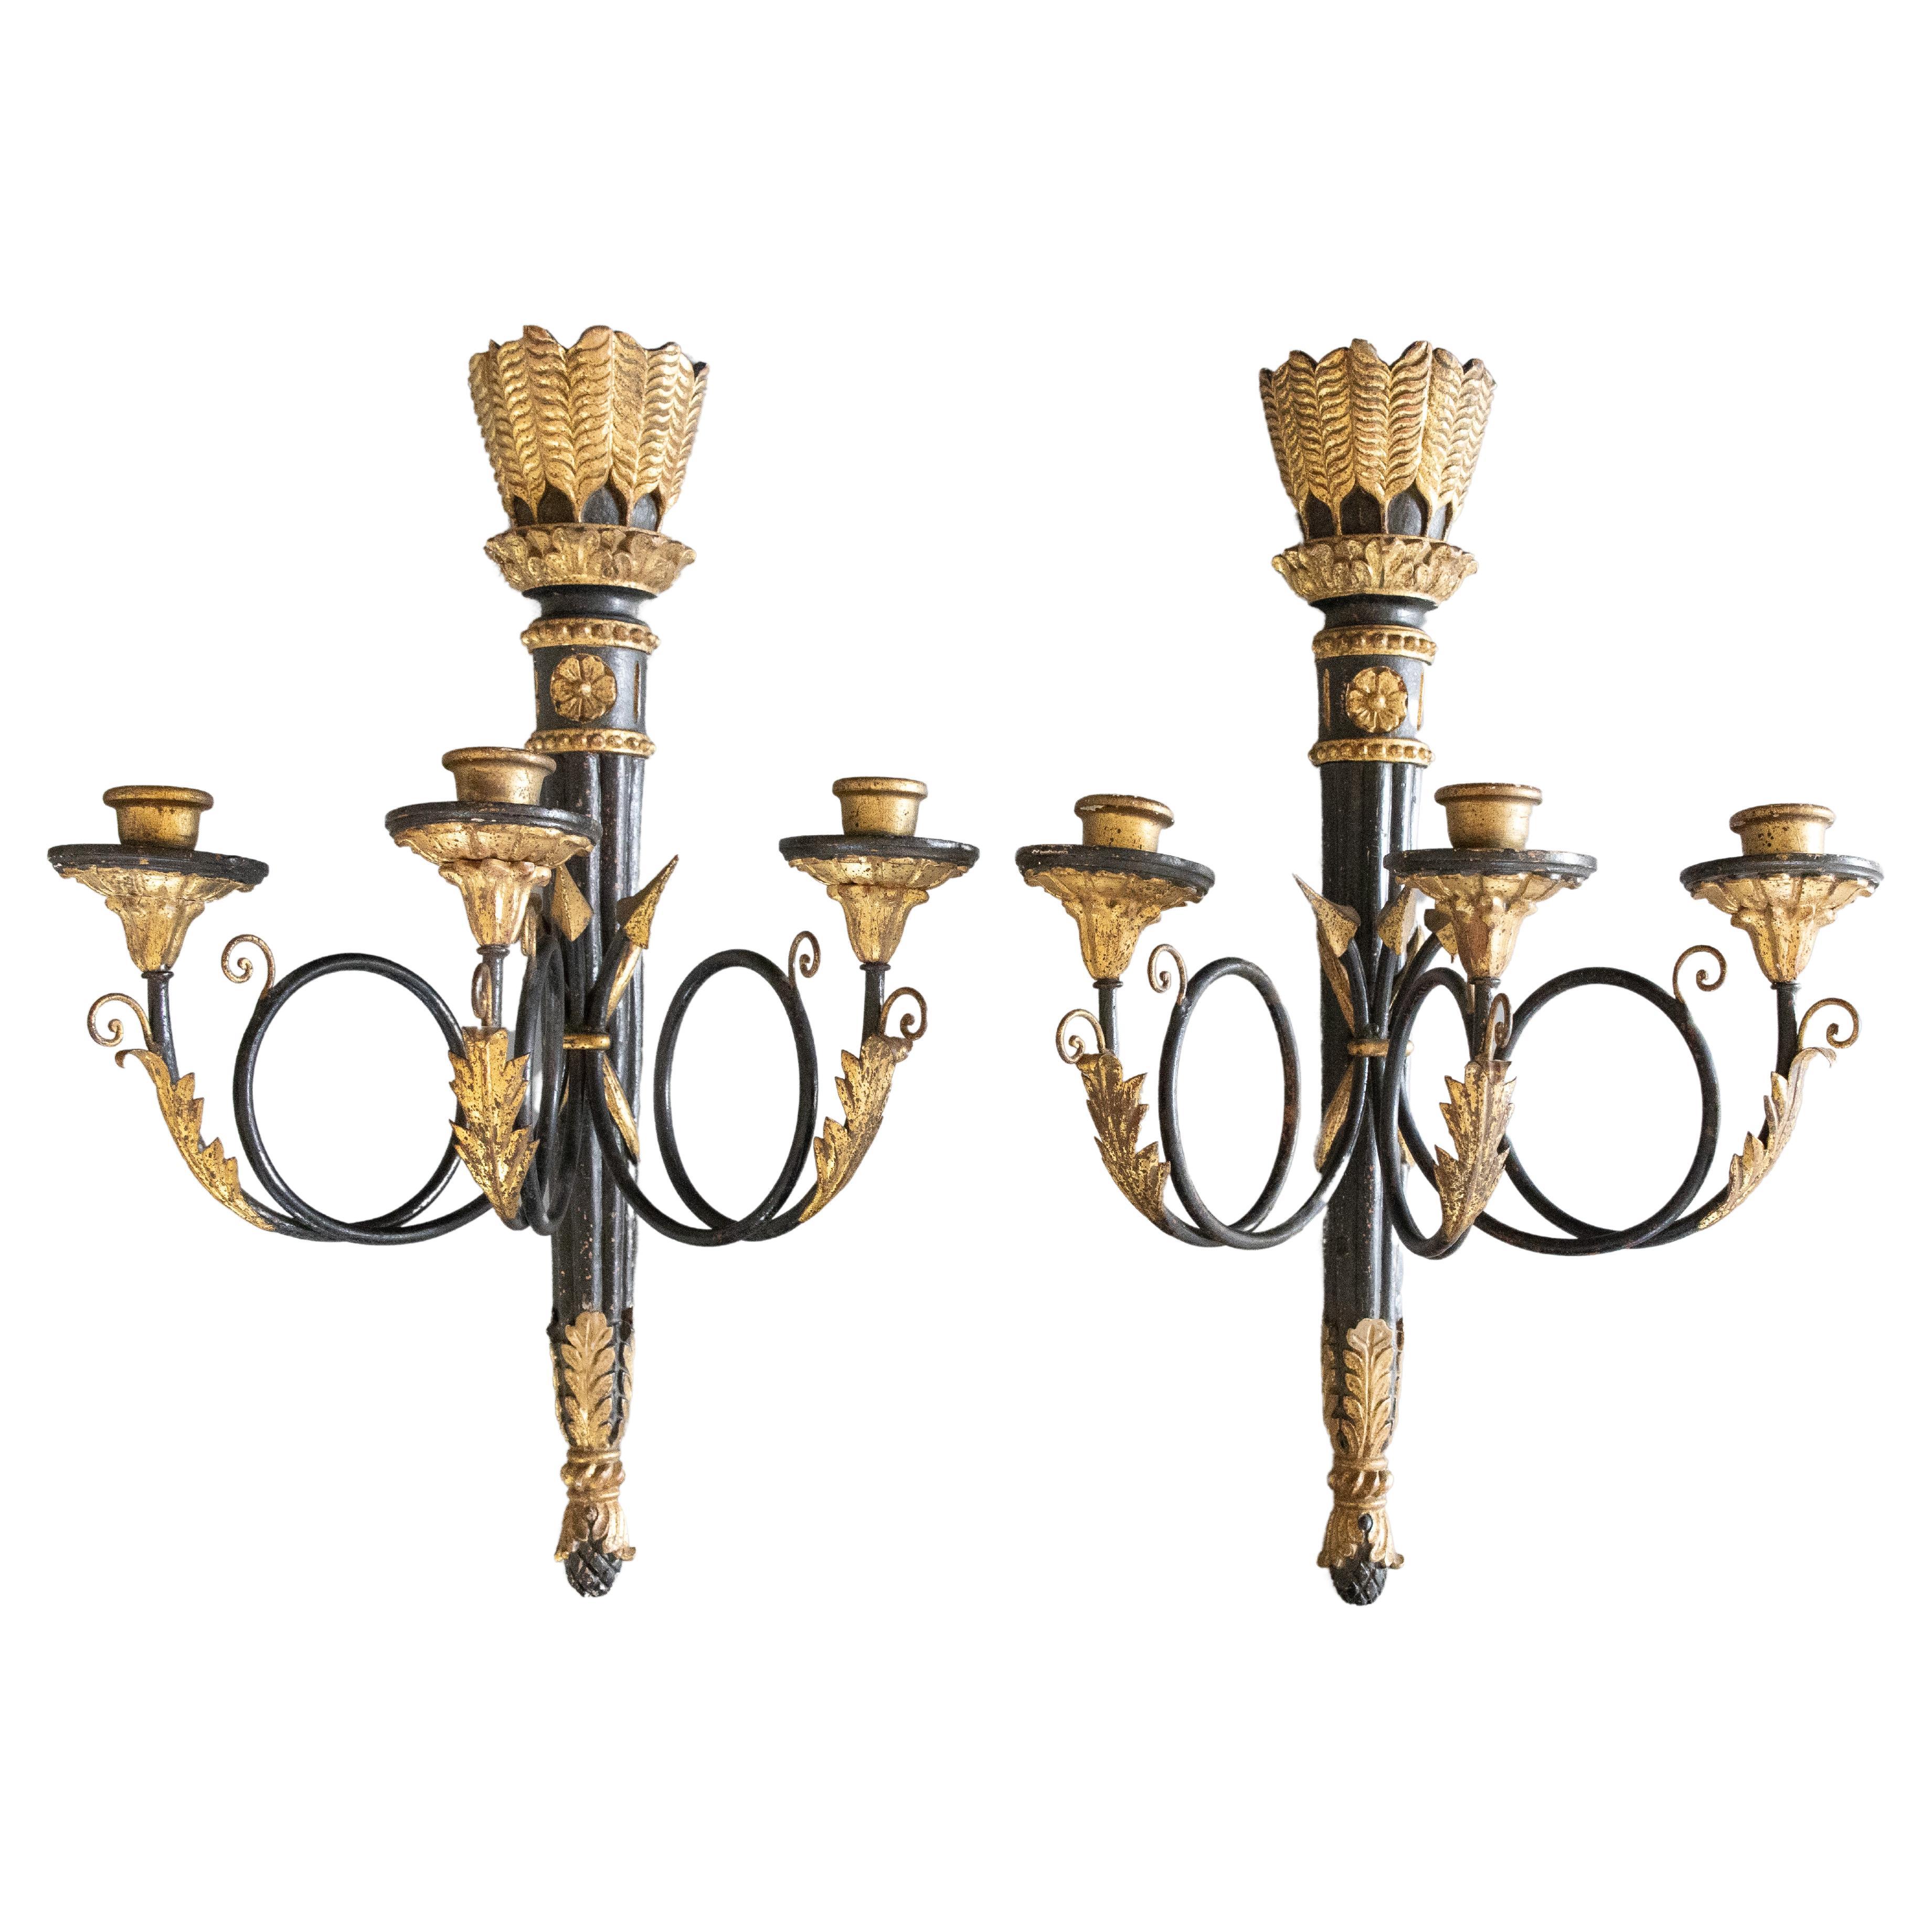 Pair Mid-Century Neoclassical Italian Black & Gold Giltwood Arrow Candle Sconces